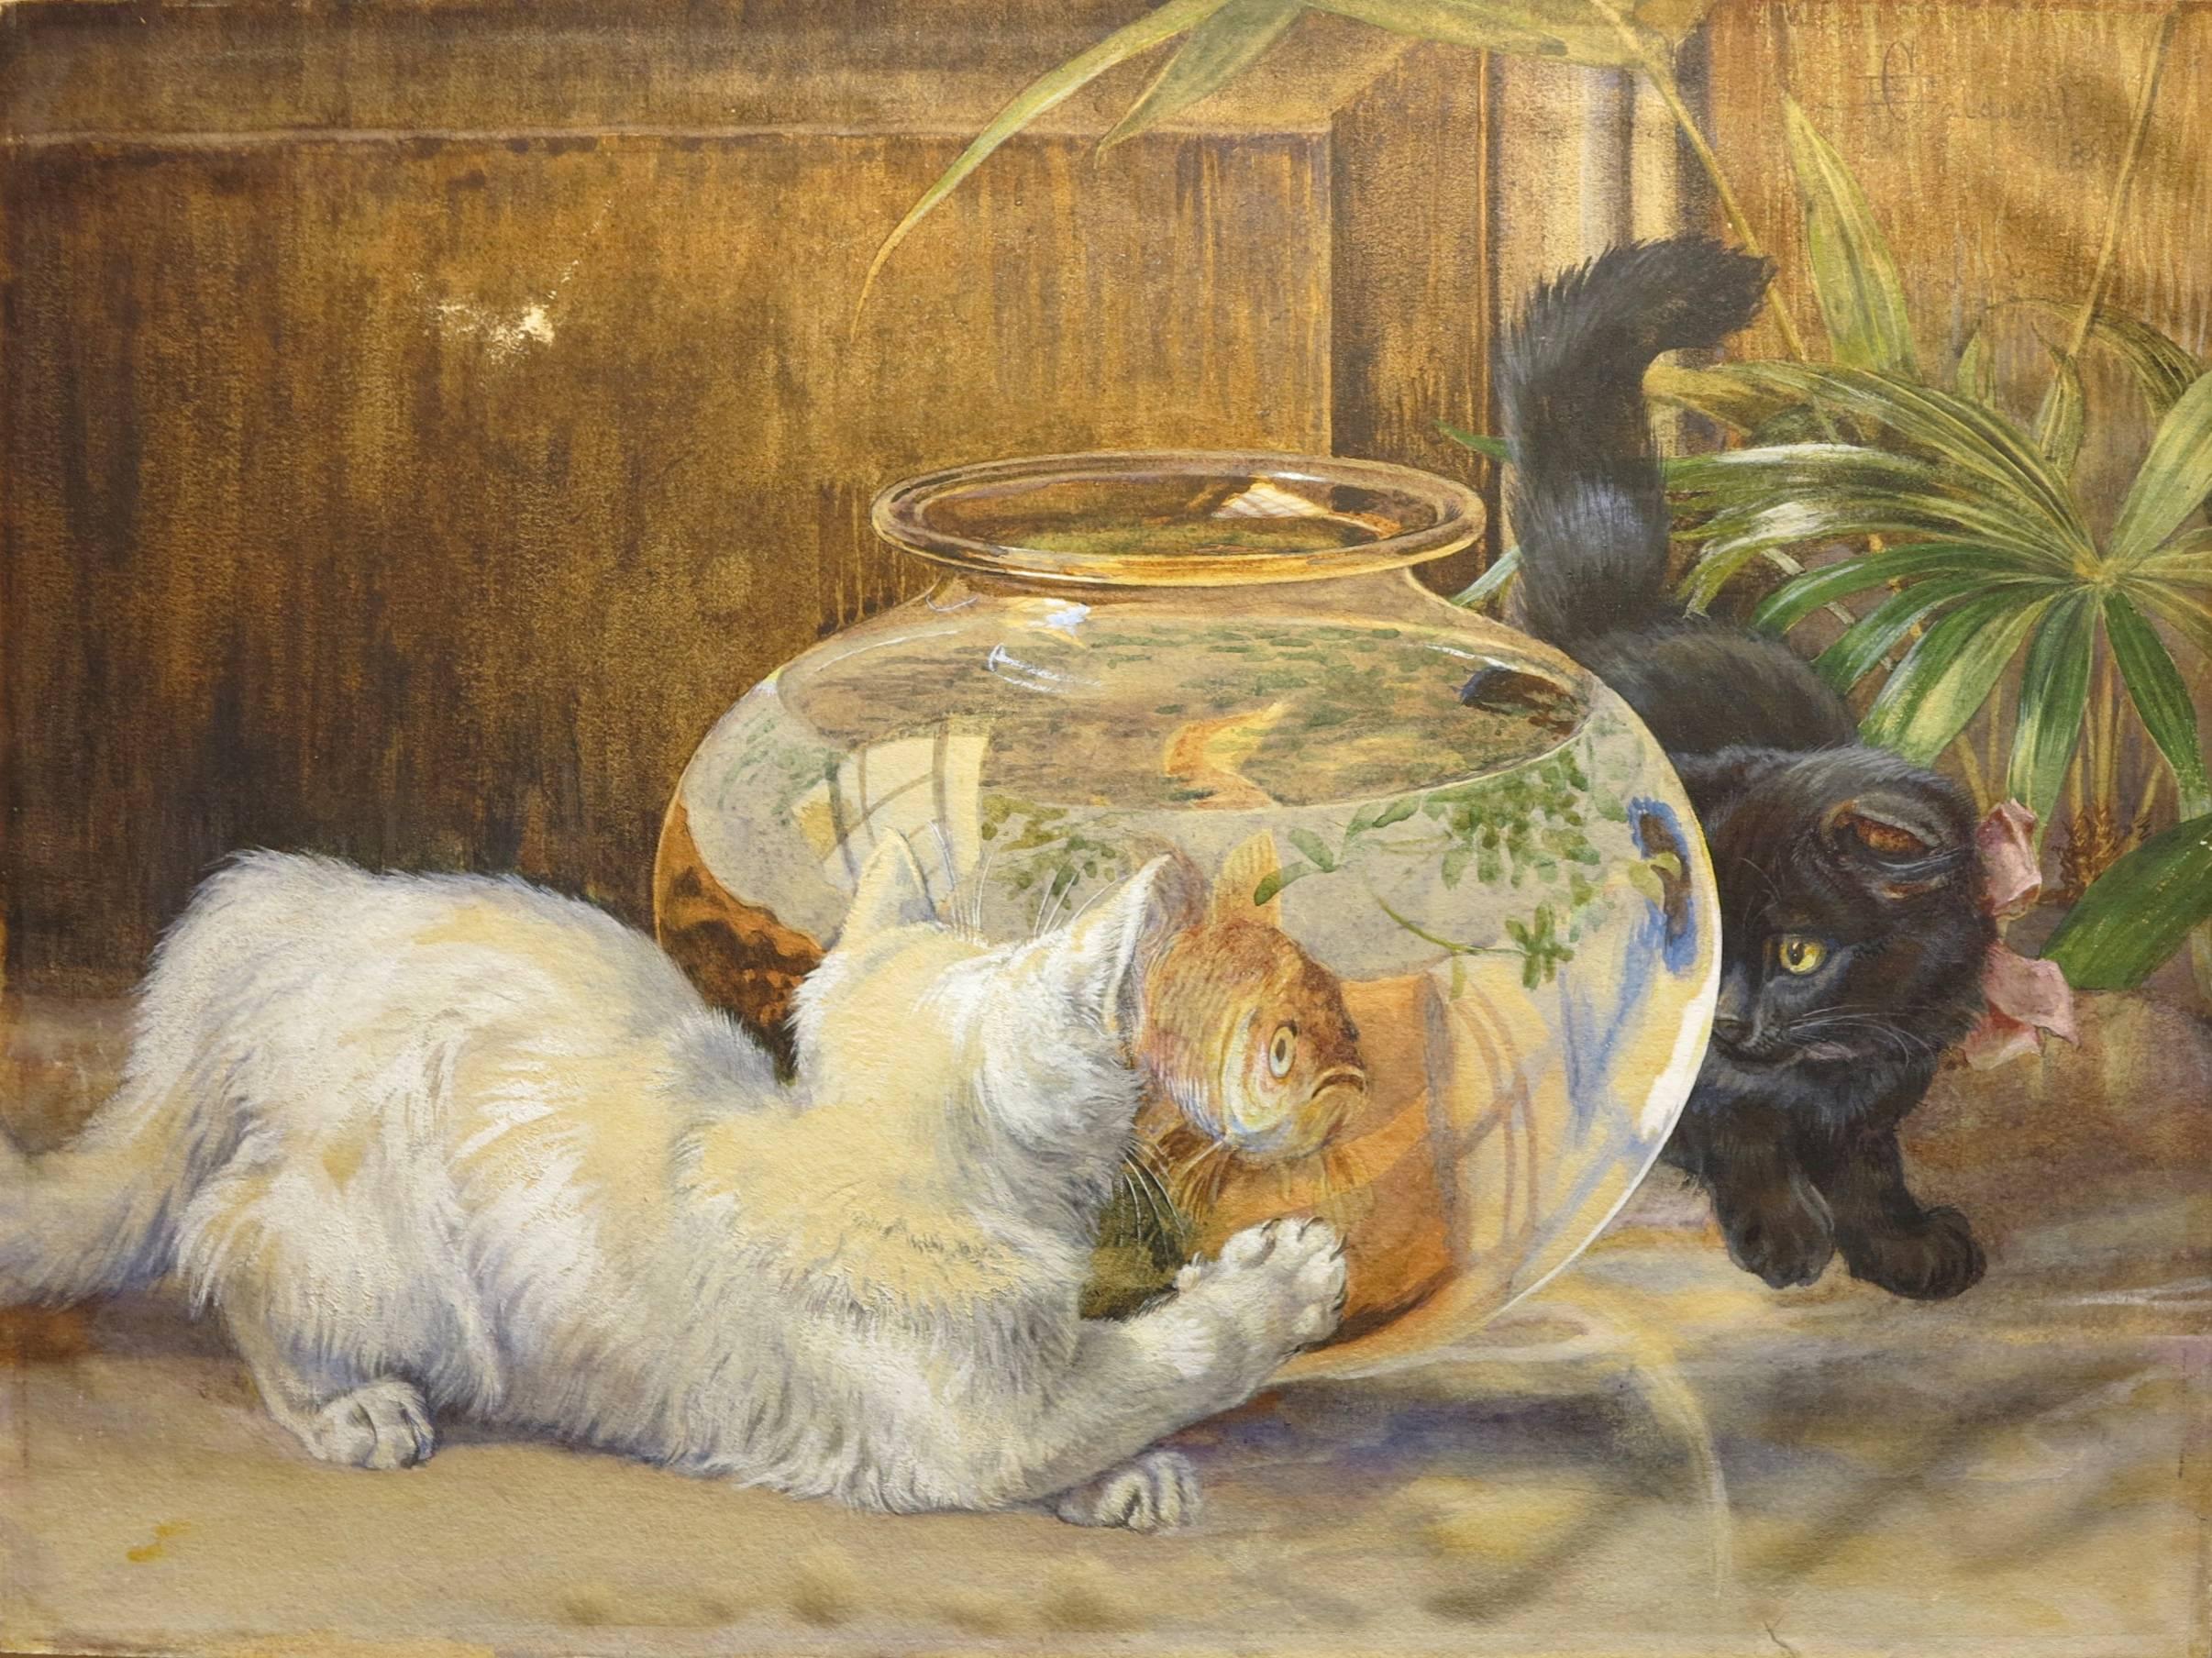 Exquisite triptych by English artist Edmund Caldwell (1852-1930). The Goldfish Bowl, 1884. Watercolor on paper mounted to cardboard backing. Panels measure 11.25 x 15 inches each . Unframed. Minor paint loss. Each panel is signed and dated upper